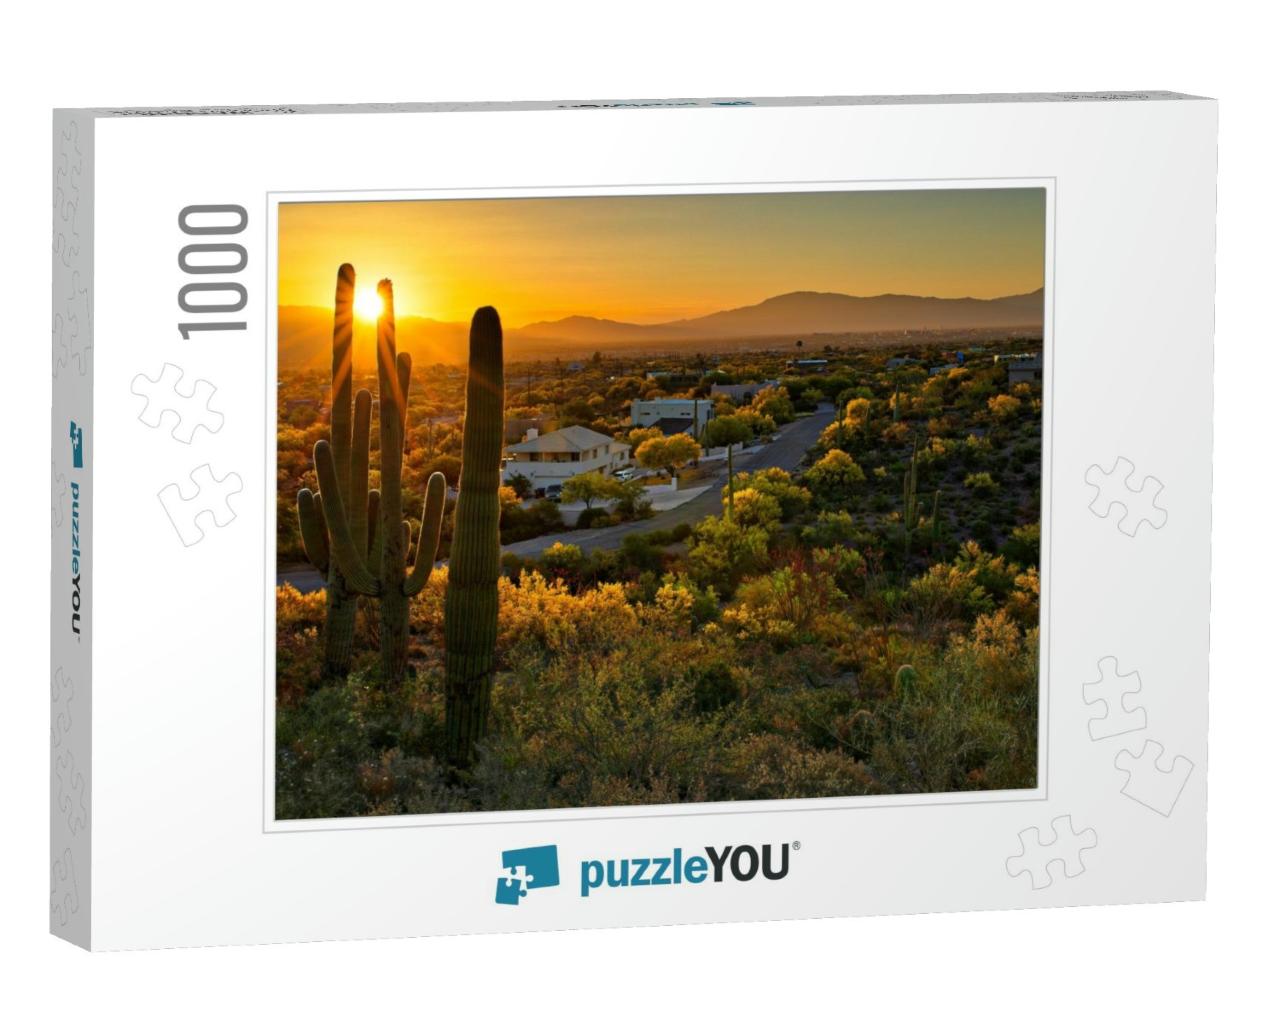 Houses Between Saguaros in Tucson Arizona... Jigsaw Puzzle with 1000 pieces